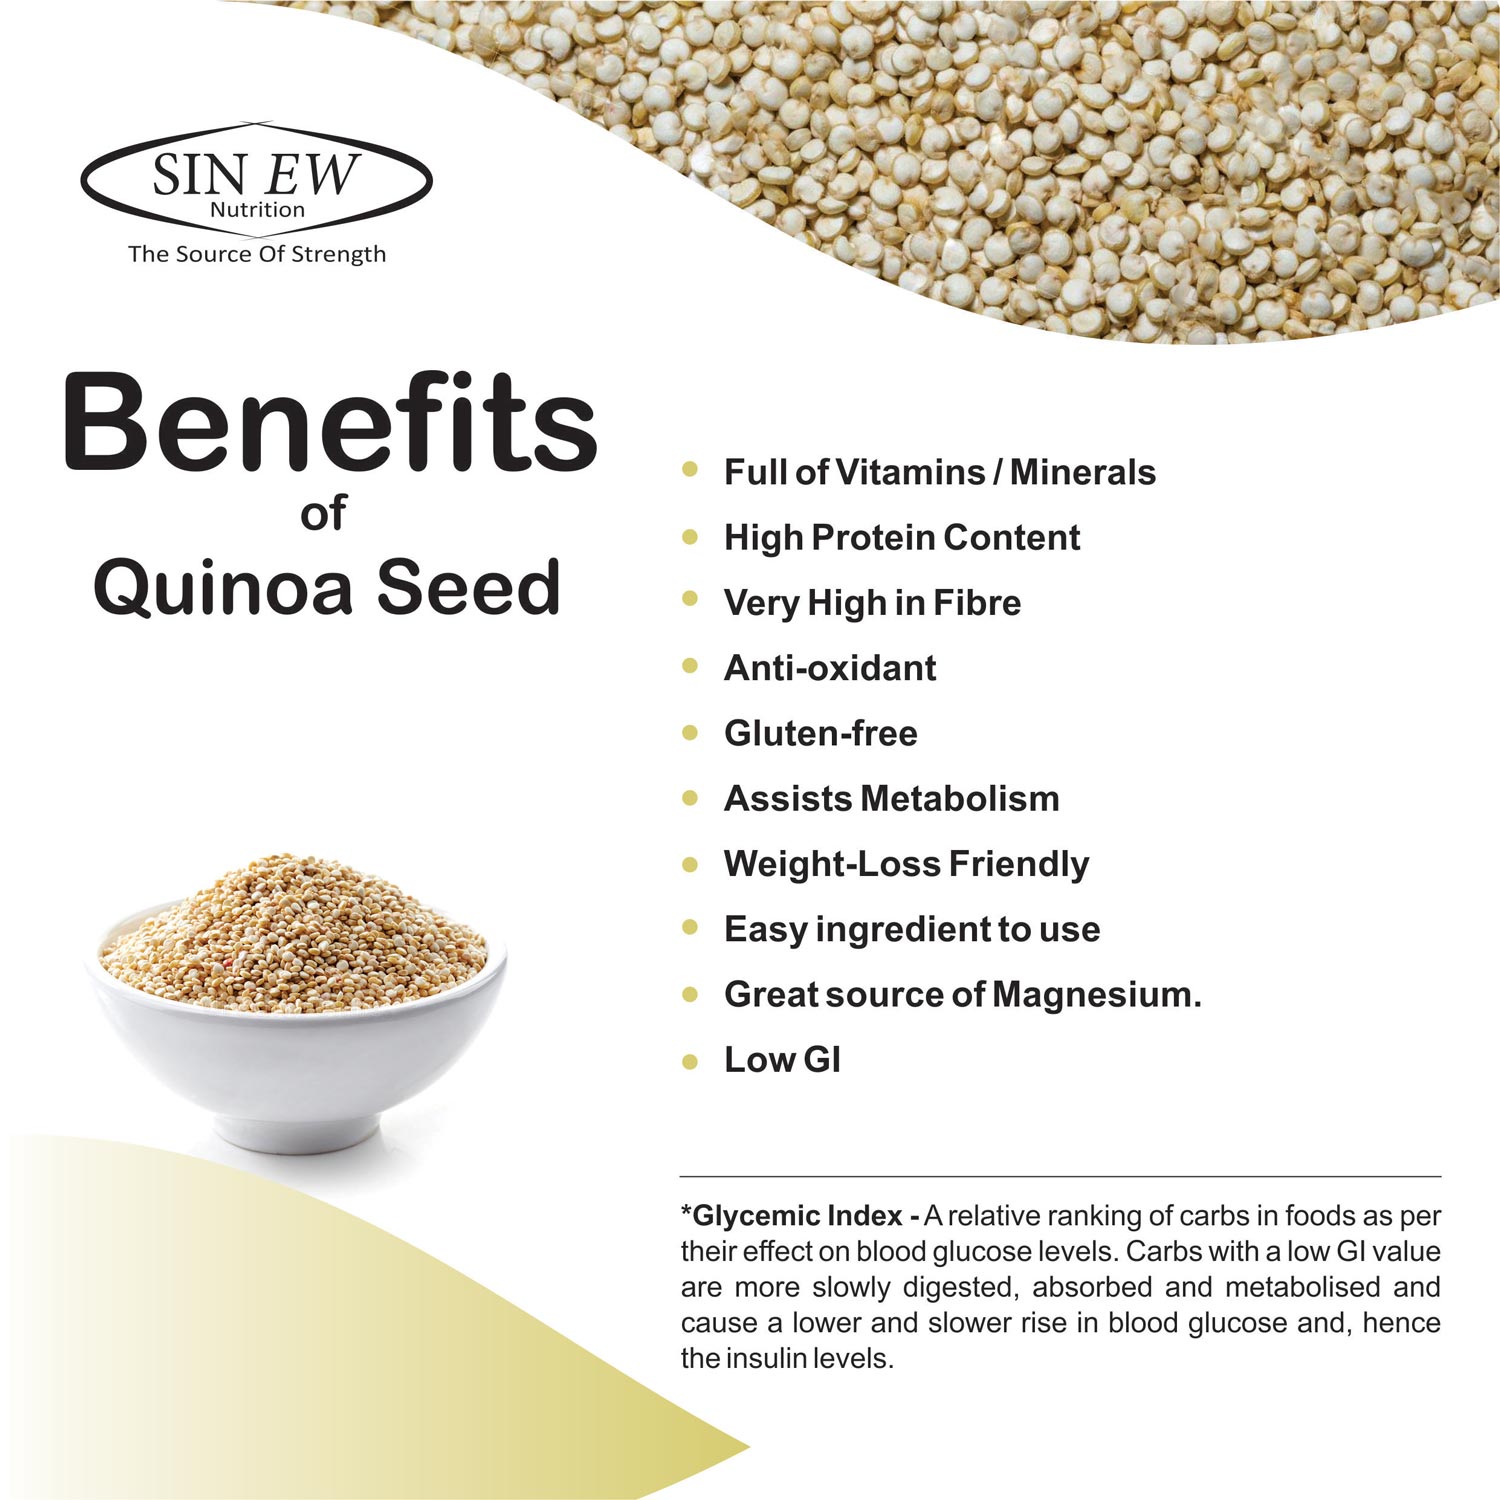 Quinoa Seed Extract for Hair Benefits and How to Use It